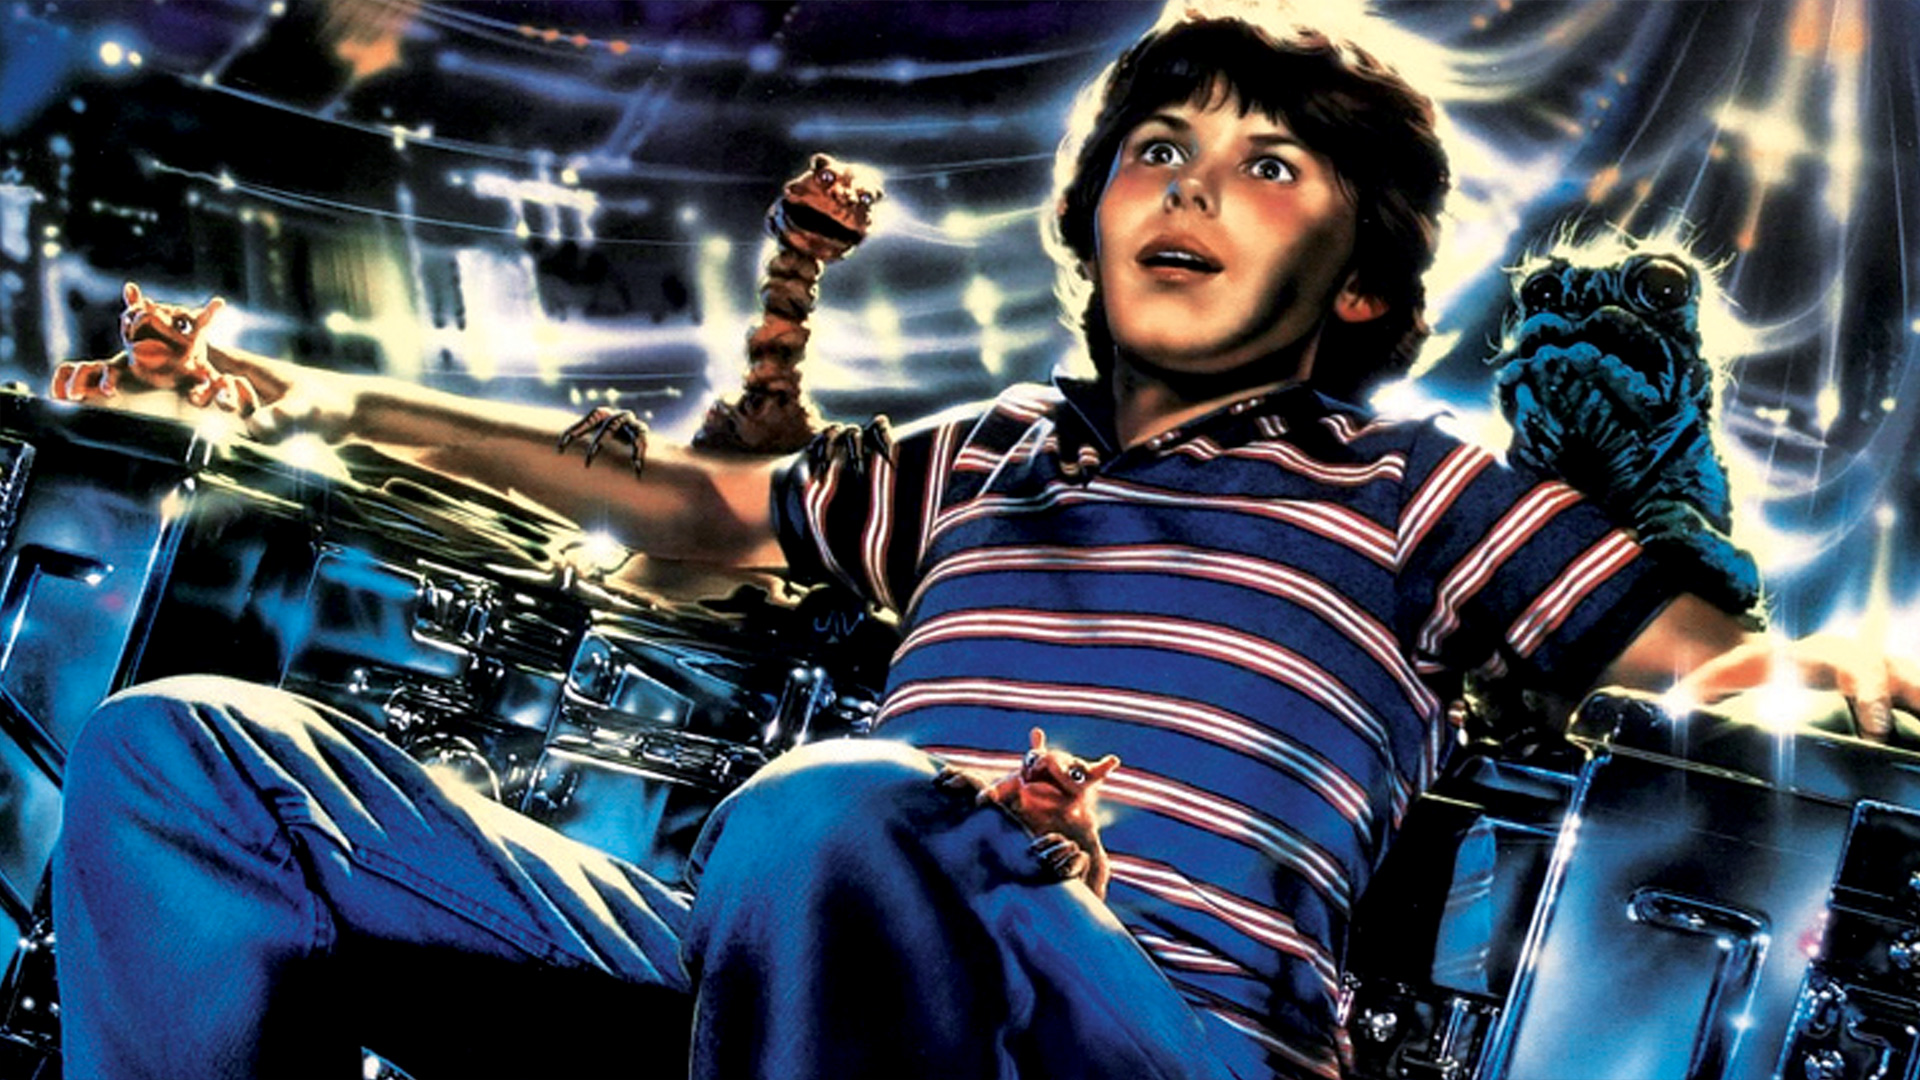 Disney Movie Flight of the Navigator From The 80s Getting Rebooted!